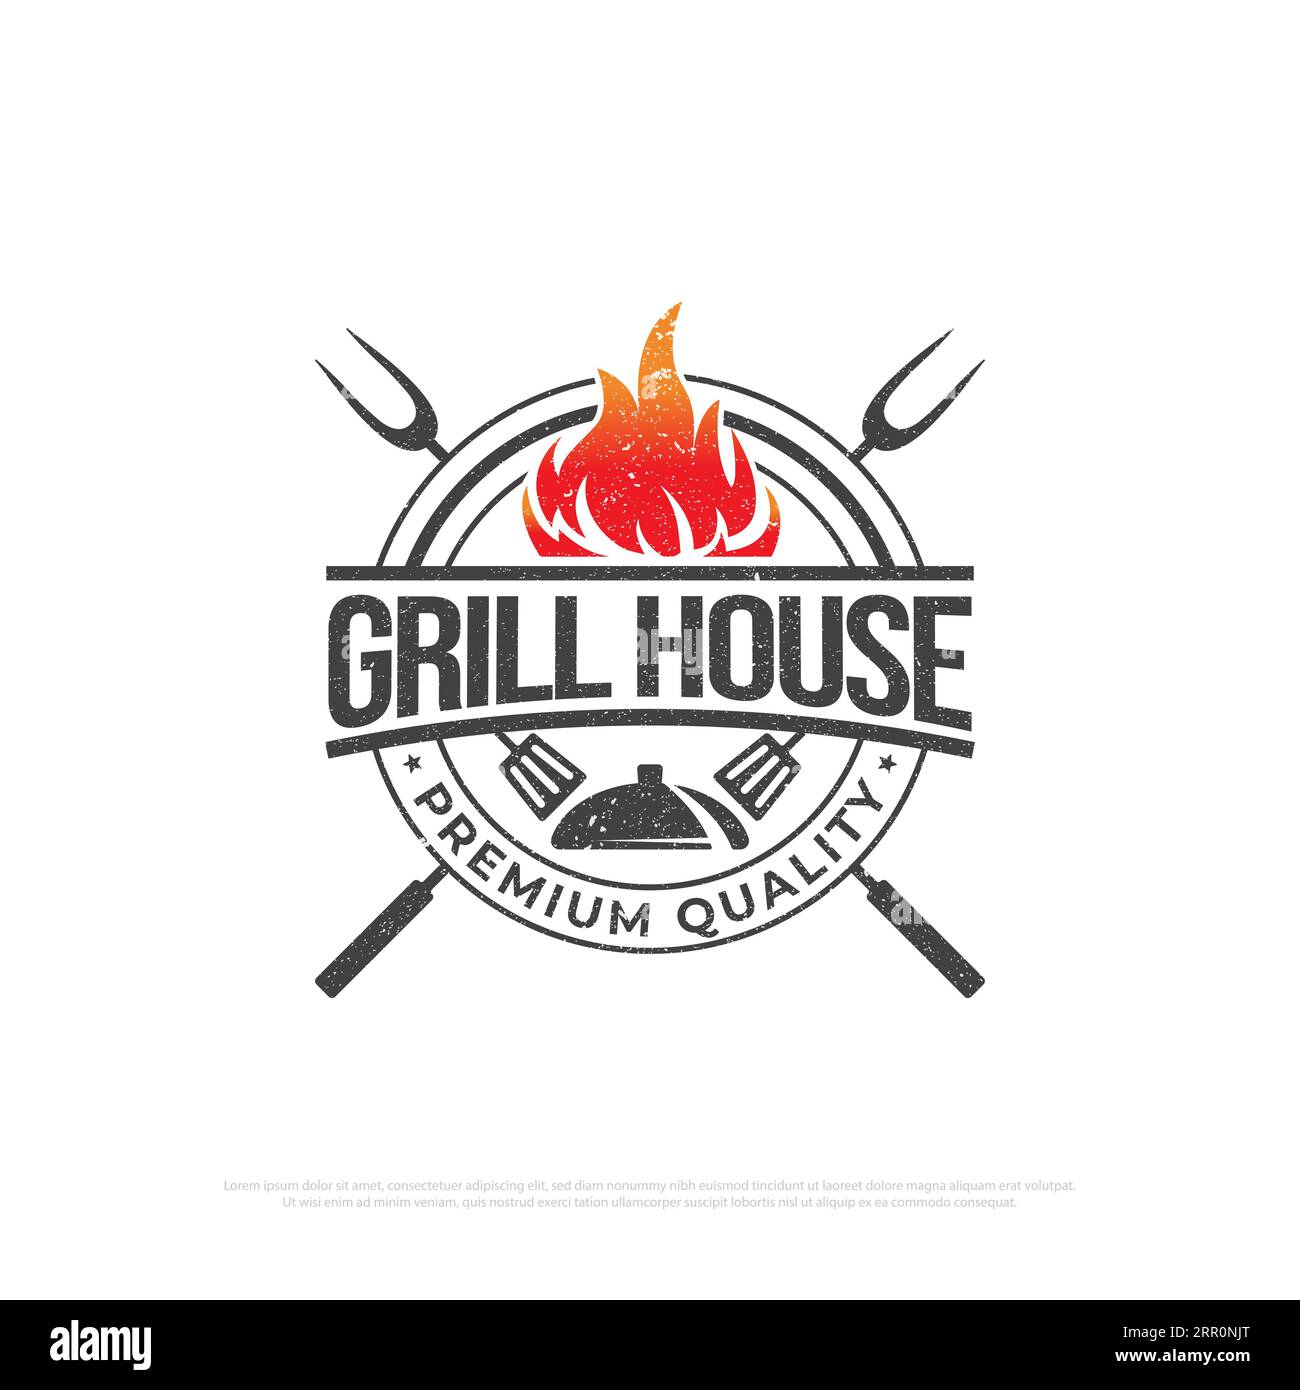 Grill house barbecue rustic logo design, retro BBQ vector, barbeque bar and restaurant icon, Red fire icon vector illustration Stock Vector